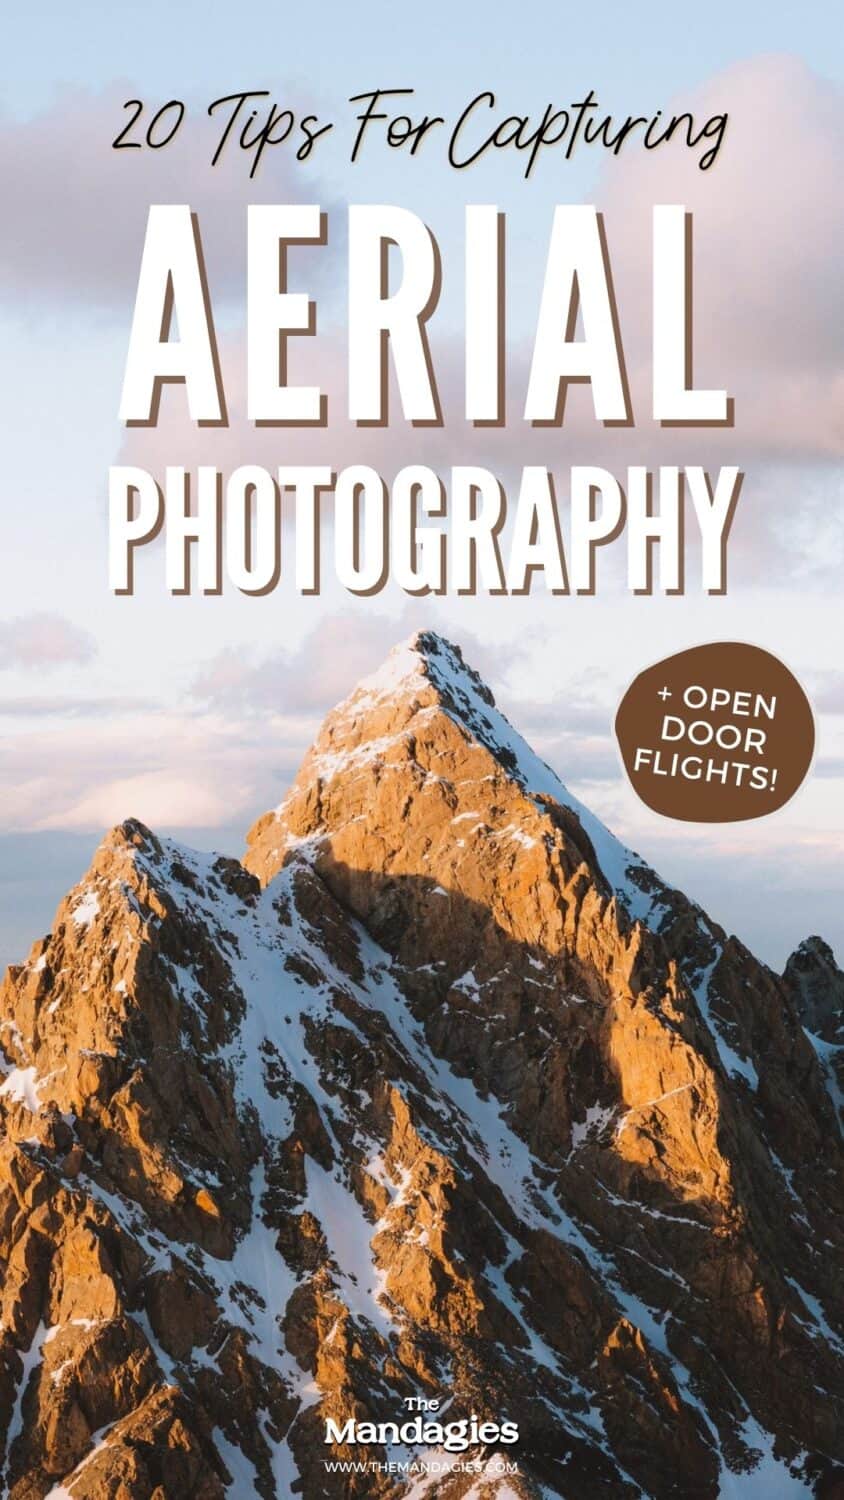 Getting ready for your first helicopter photography tour? We're sharing the best aerial photography tips and tricks, and gear recommendations from B&H Photo, and camera settings for the best aerial photos! #aerialphotography #photography #photos #helicopterride #mountains #cityscapes #newyork #travel #adventure #plane #nature #photography